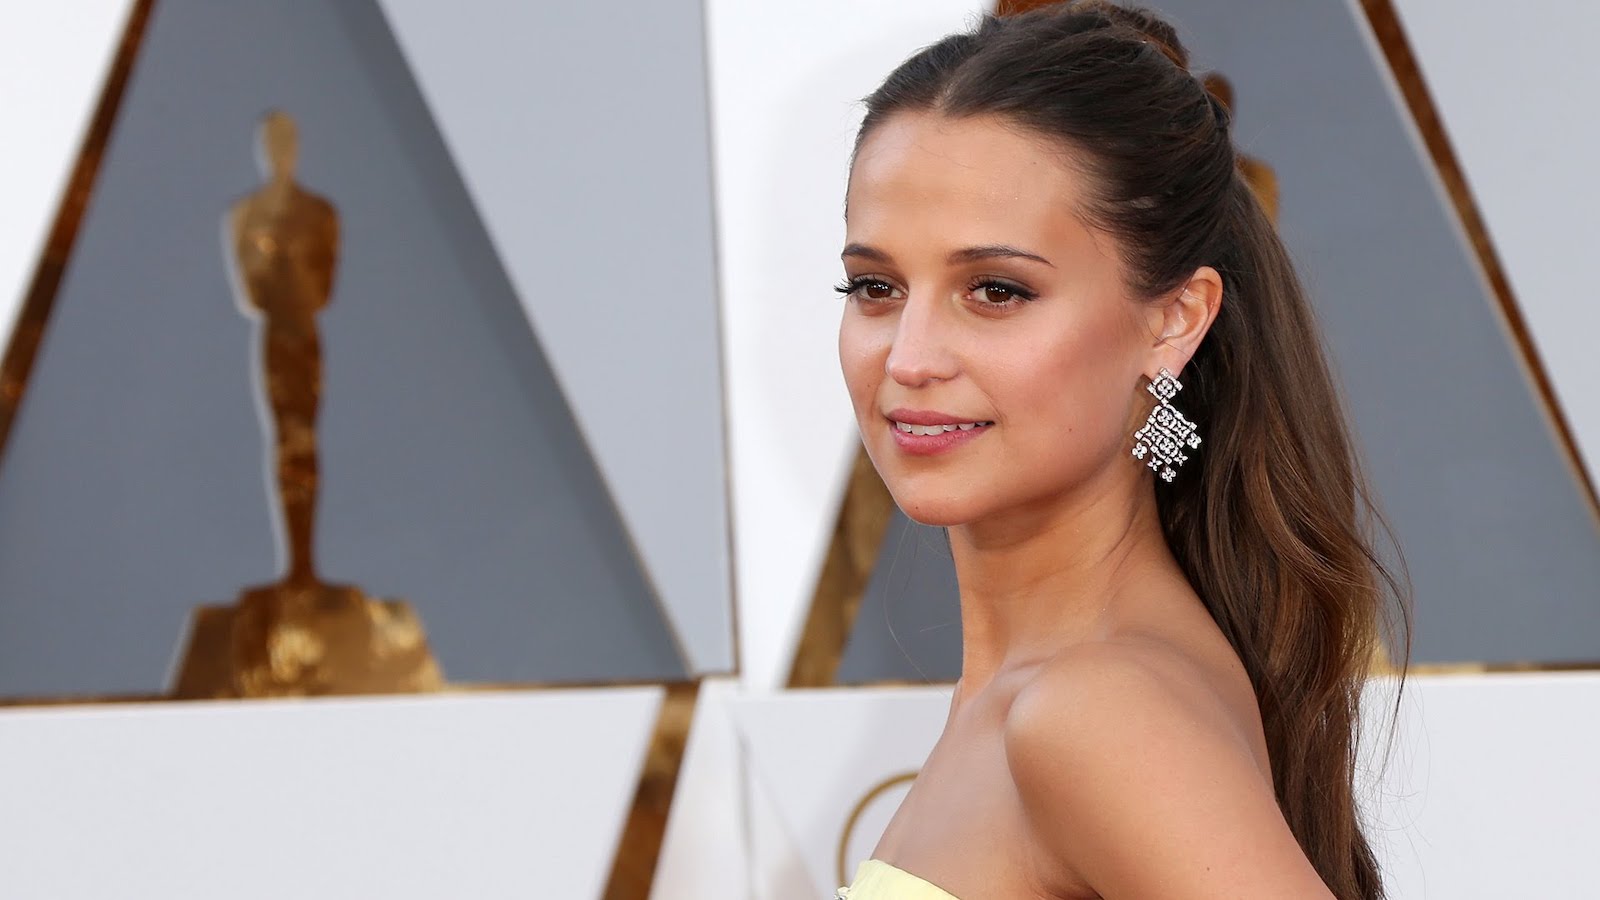 Firebrand: Alicia Vikander is a royal Katherine Parr in the first image